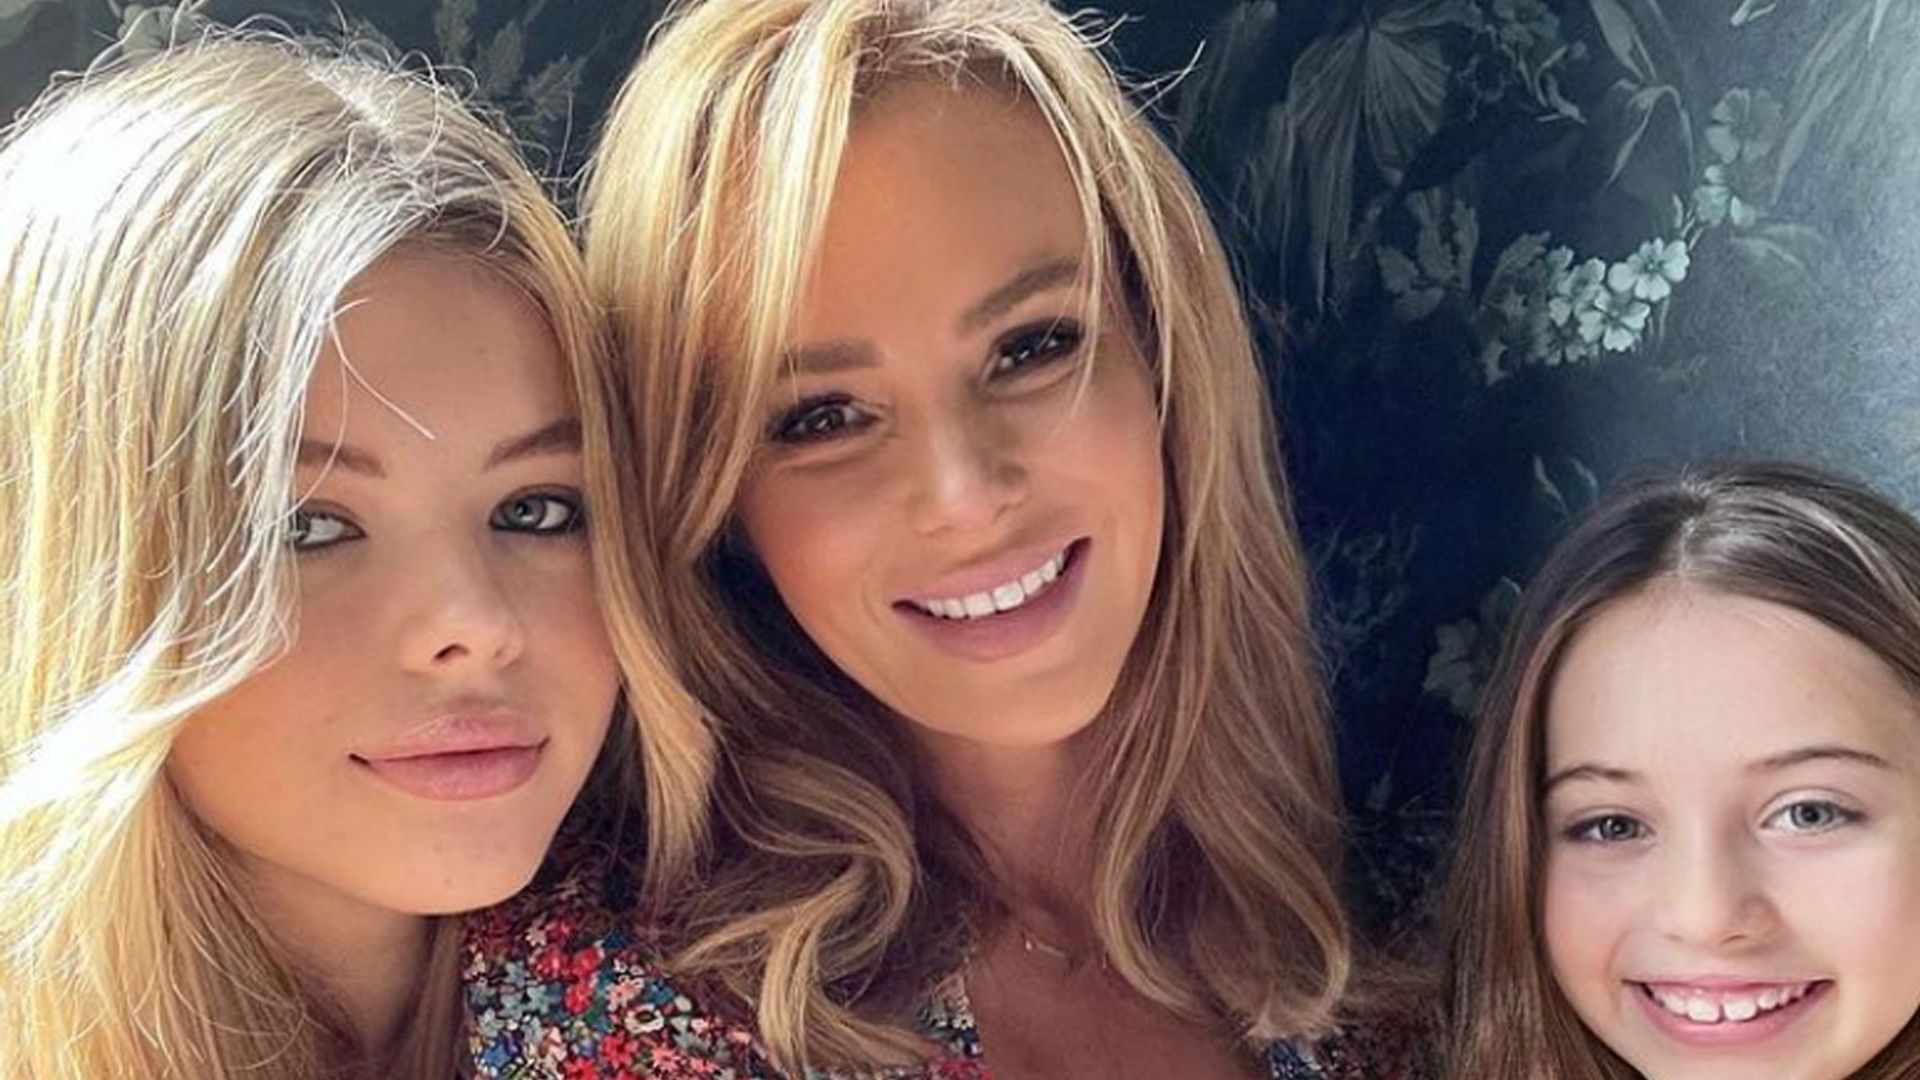 Amanda Holden stuns fans with beautiful new photo of daughter Lexi